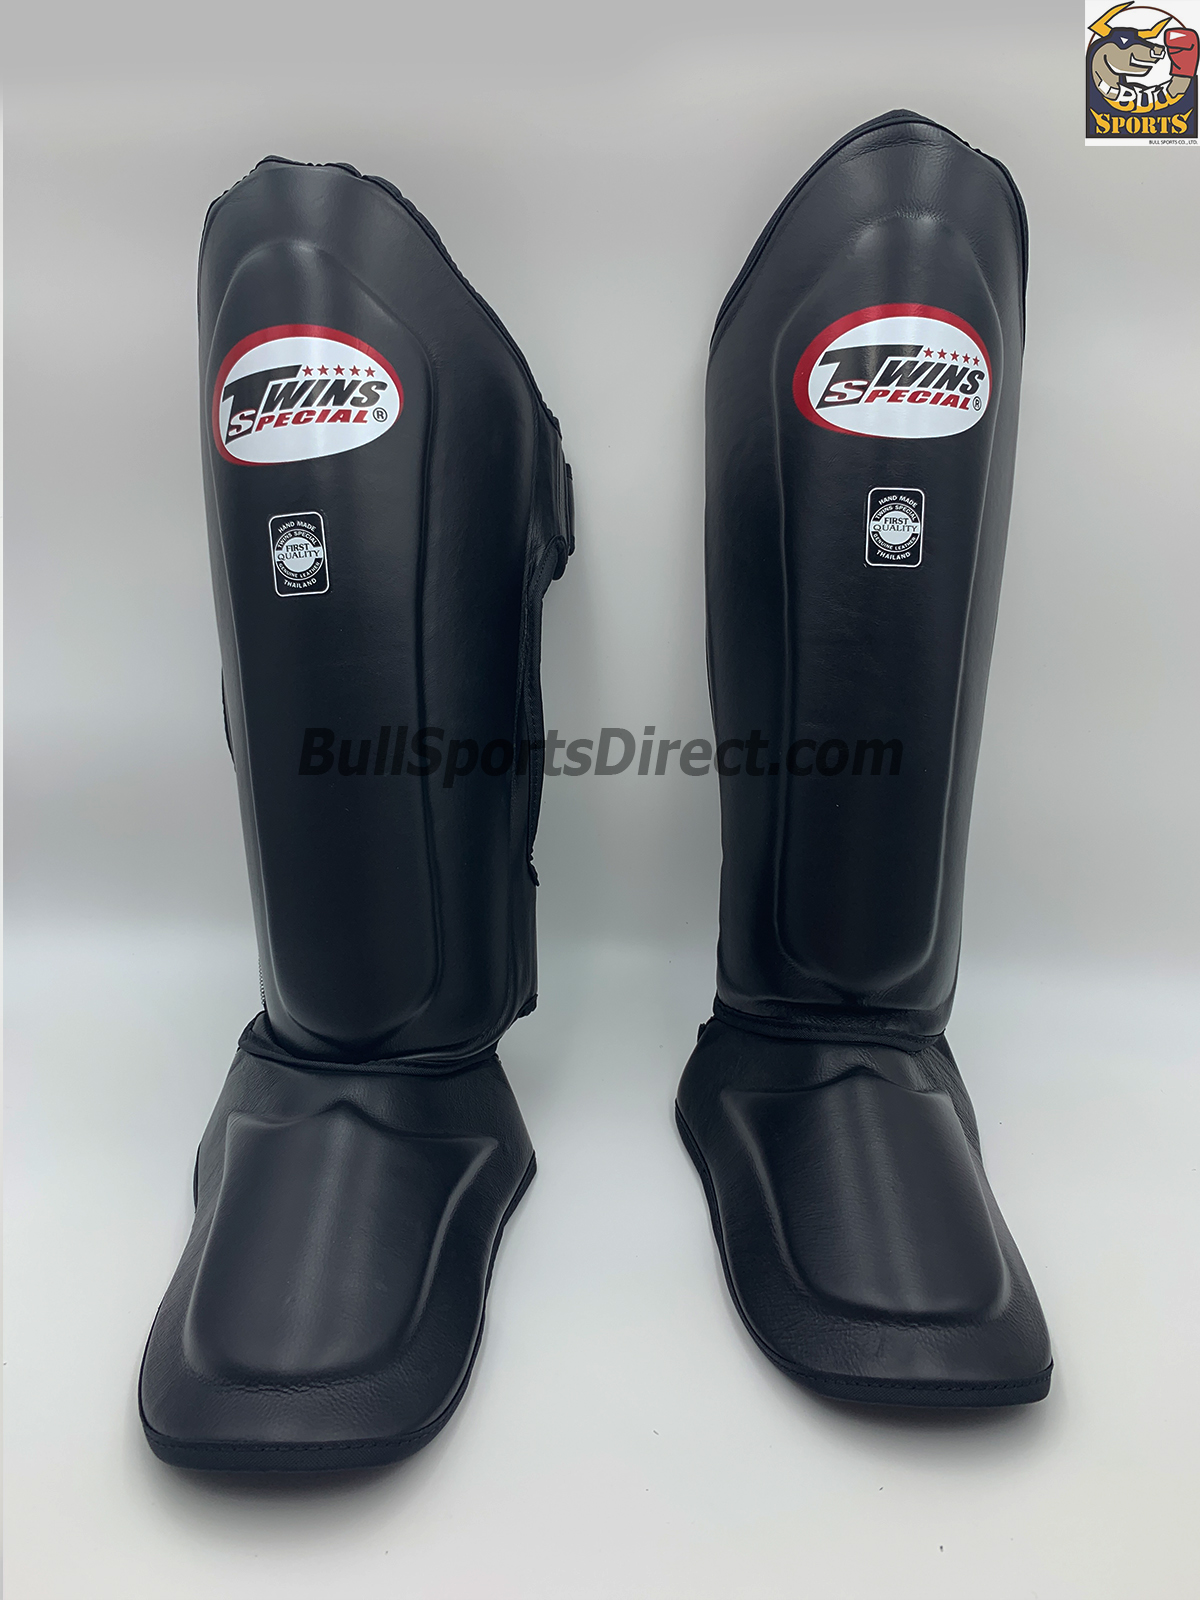 Twins Special Tournament Style Shin Guards